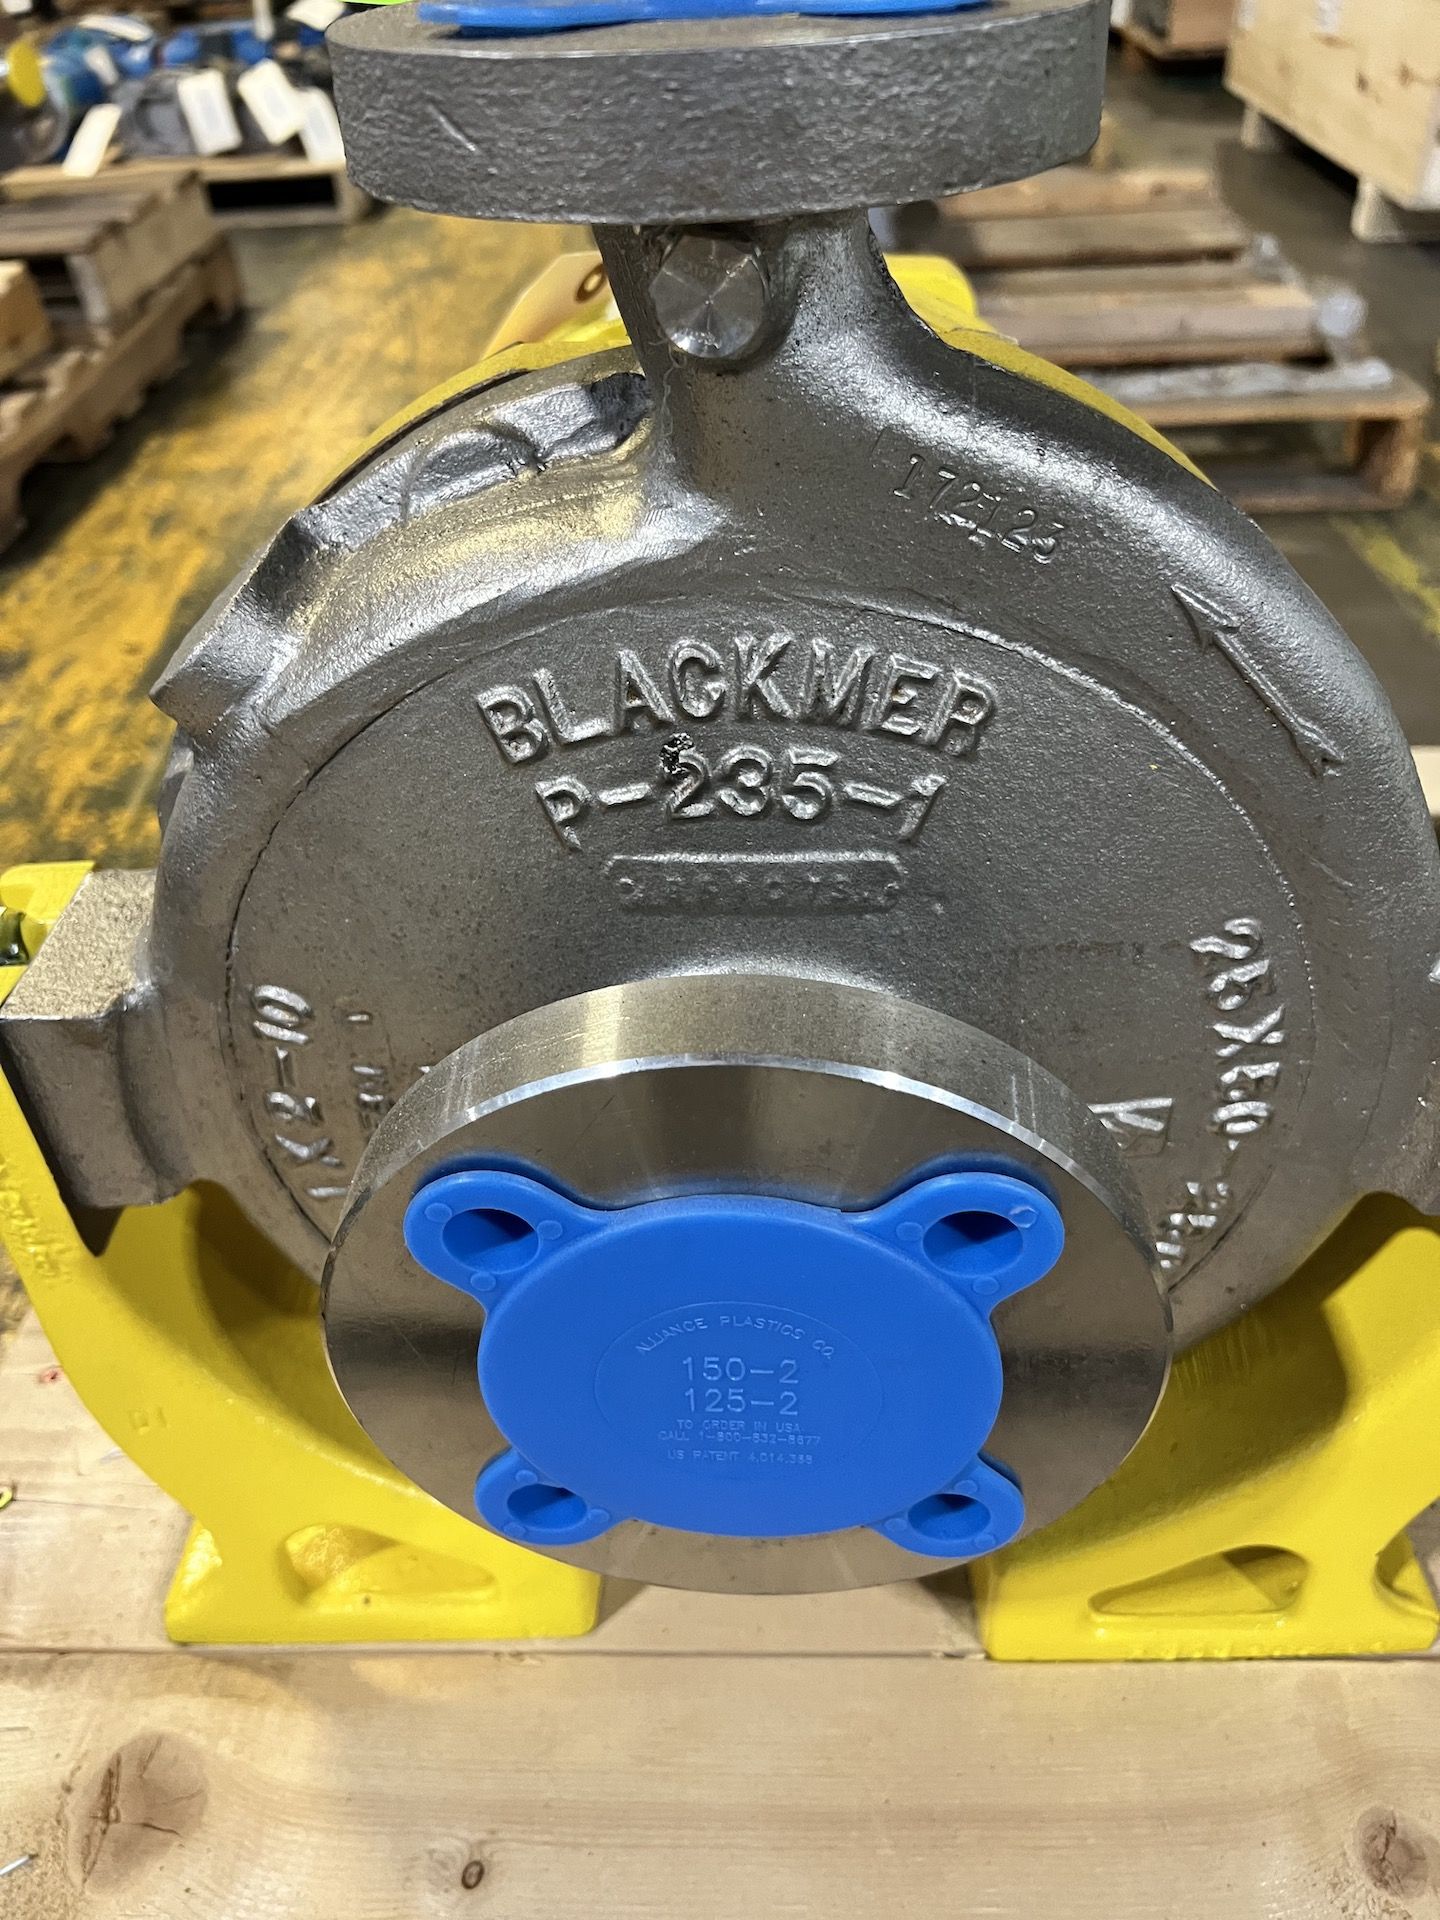 NEW BLACKMER CENTRIFUGAL PUMP HEAD, MODEL FRA, S/N 2321841 A, SIZE 1X2-10 (SIMPLE LOADING FEE $110) - Image 2 of 7